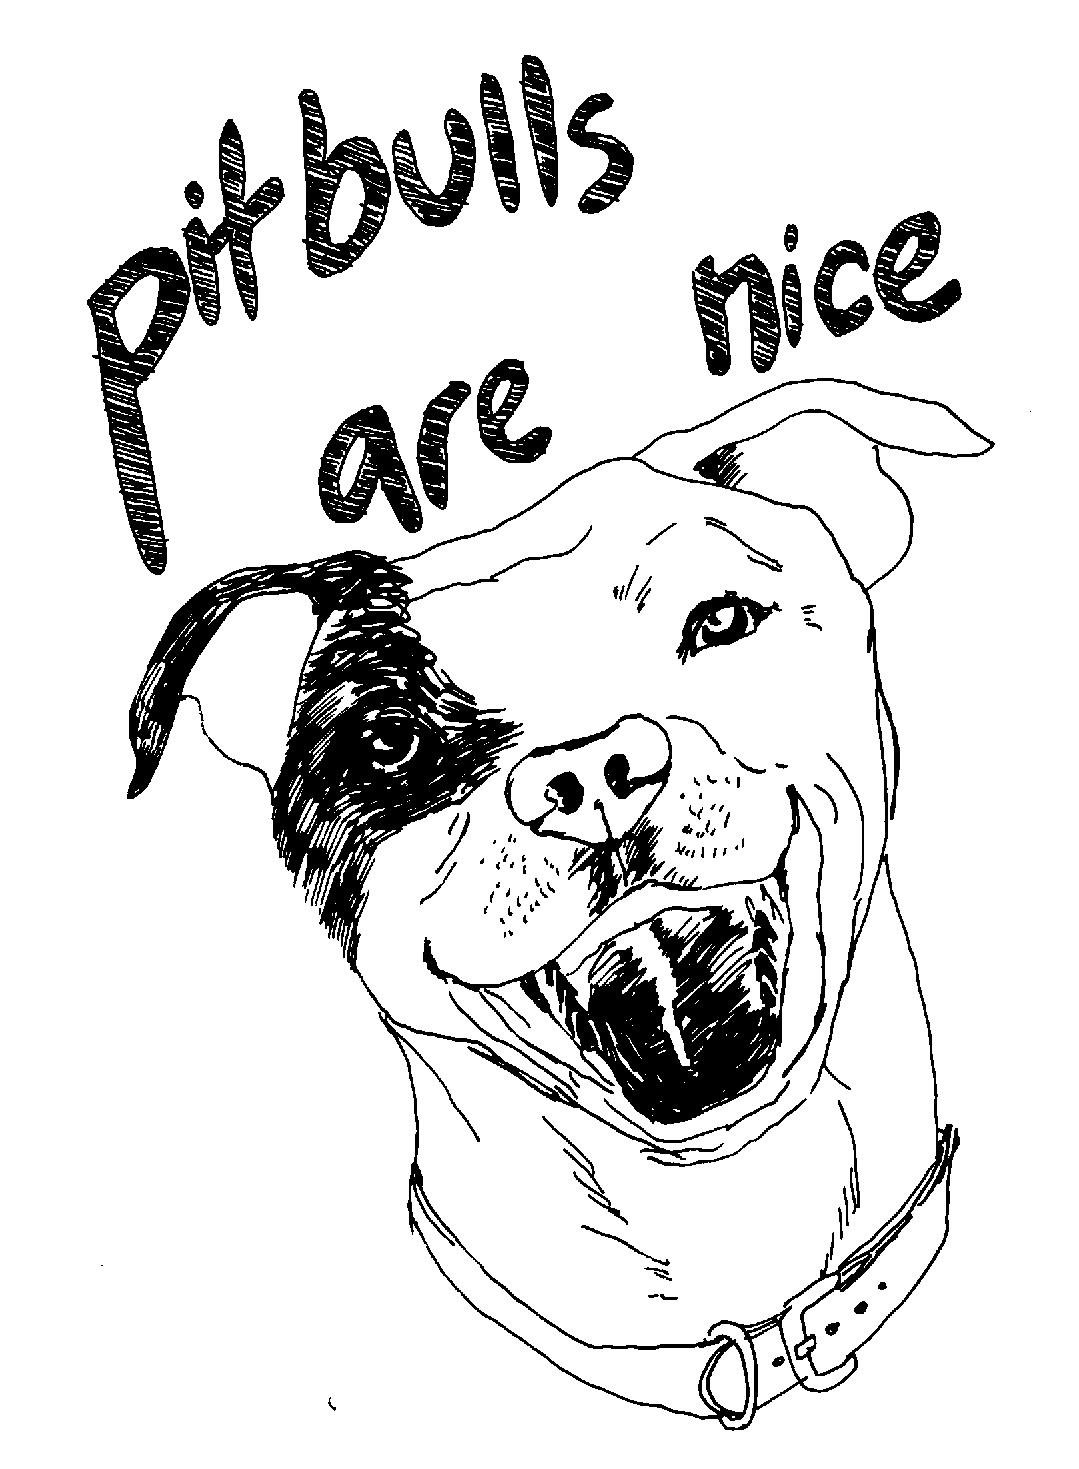 Pitbull coloring pages to download and print for free